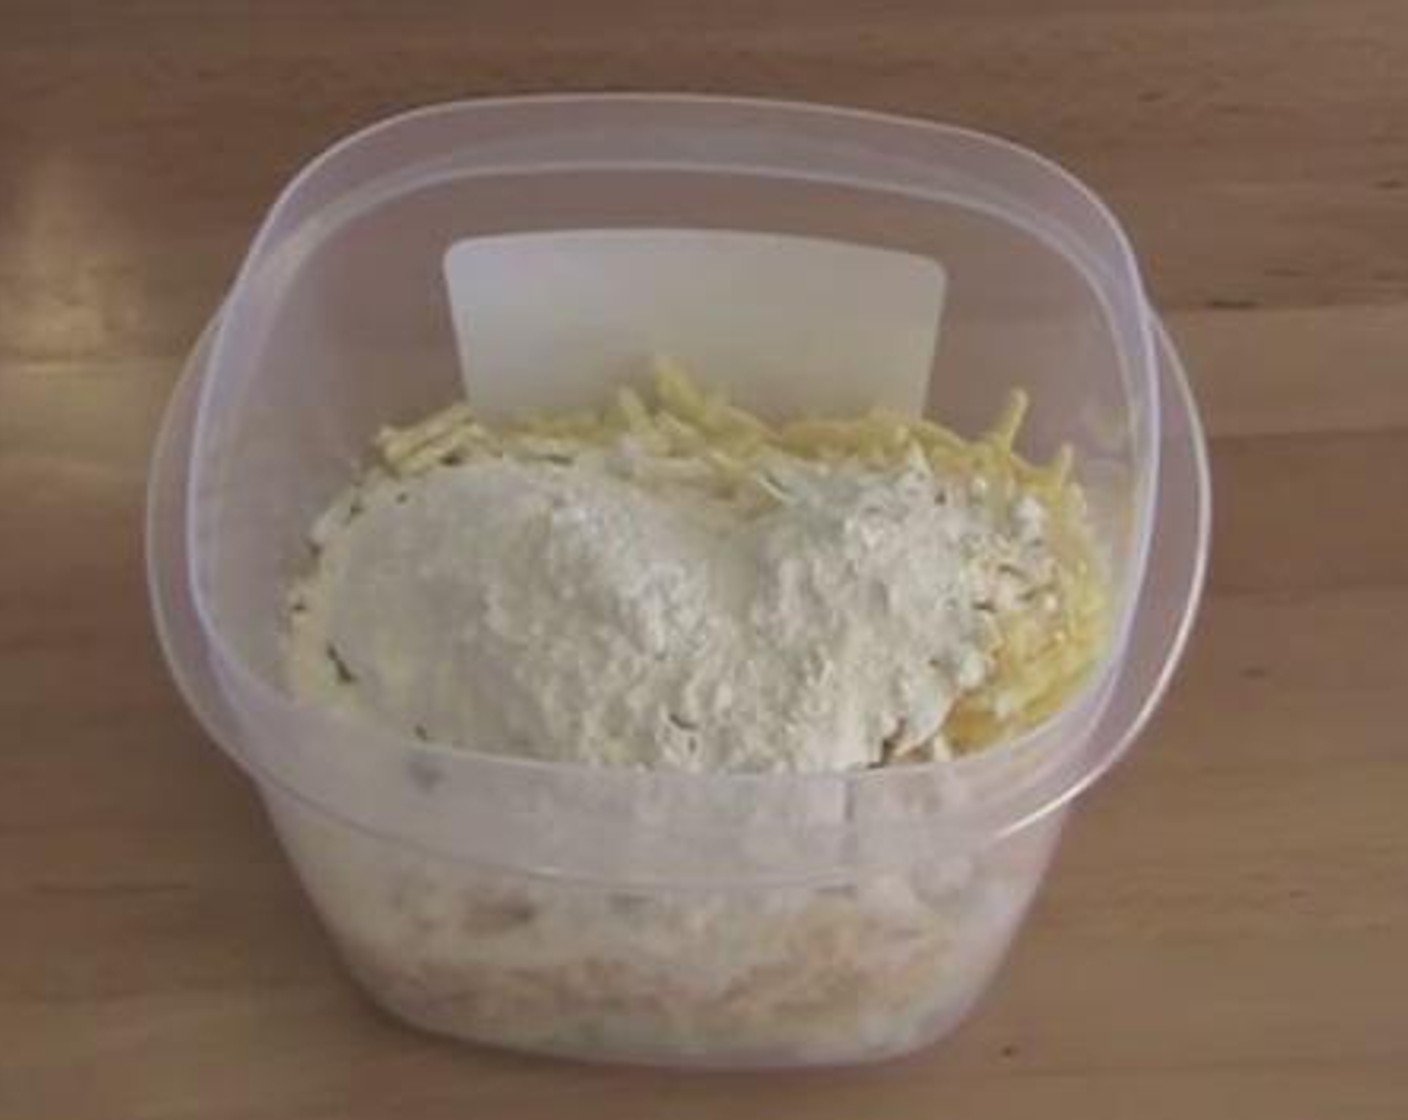 step 2 Inside a plastic container, add the Yellow Onion (1), Ham (1 cup), Cheddar Cheese (1/2 cup), and Self-Rising Flour (1/2 cup). Put on the lid over the container and shake until everything is mixed well.